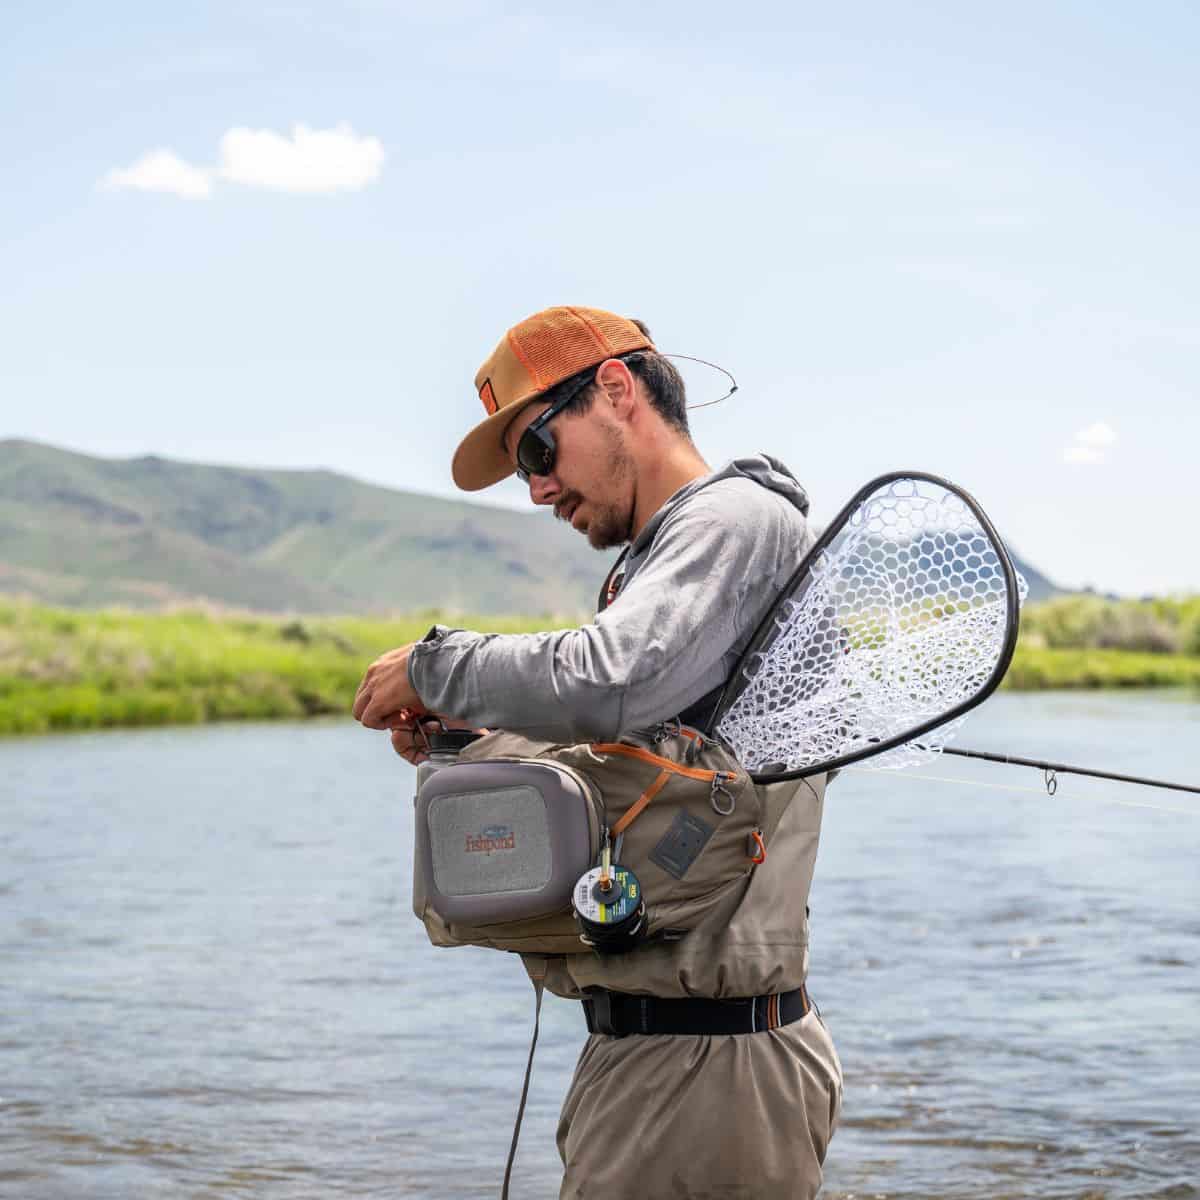 NCN 816332016240 Fishpond Nomad Canyon Fly Fishing Net Standing In River